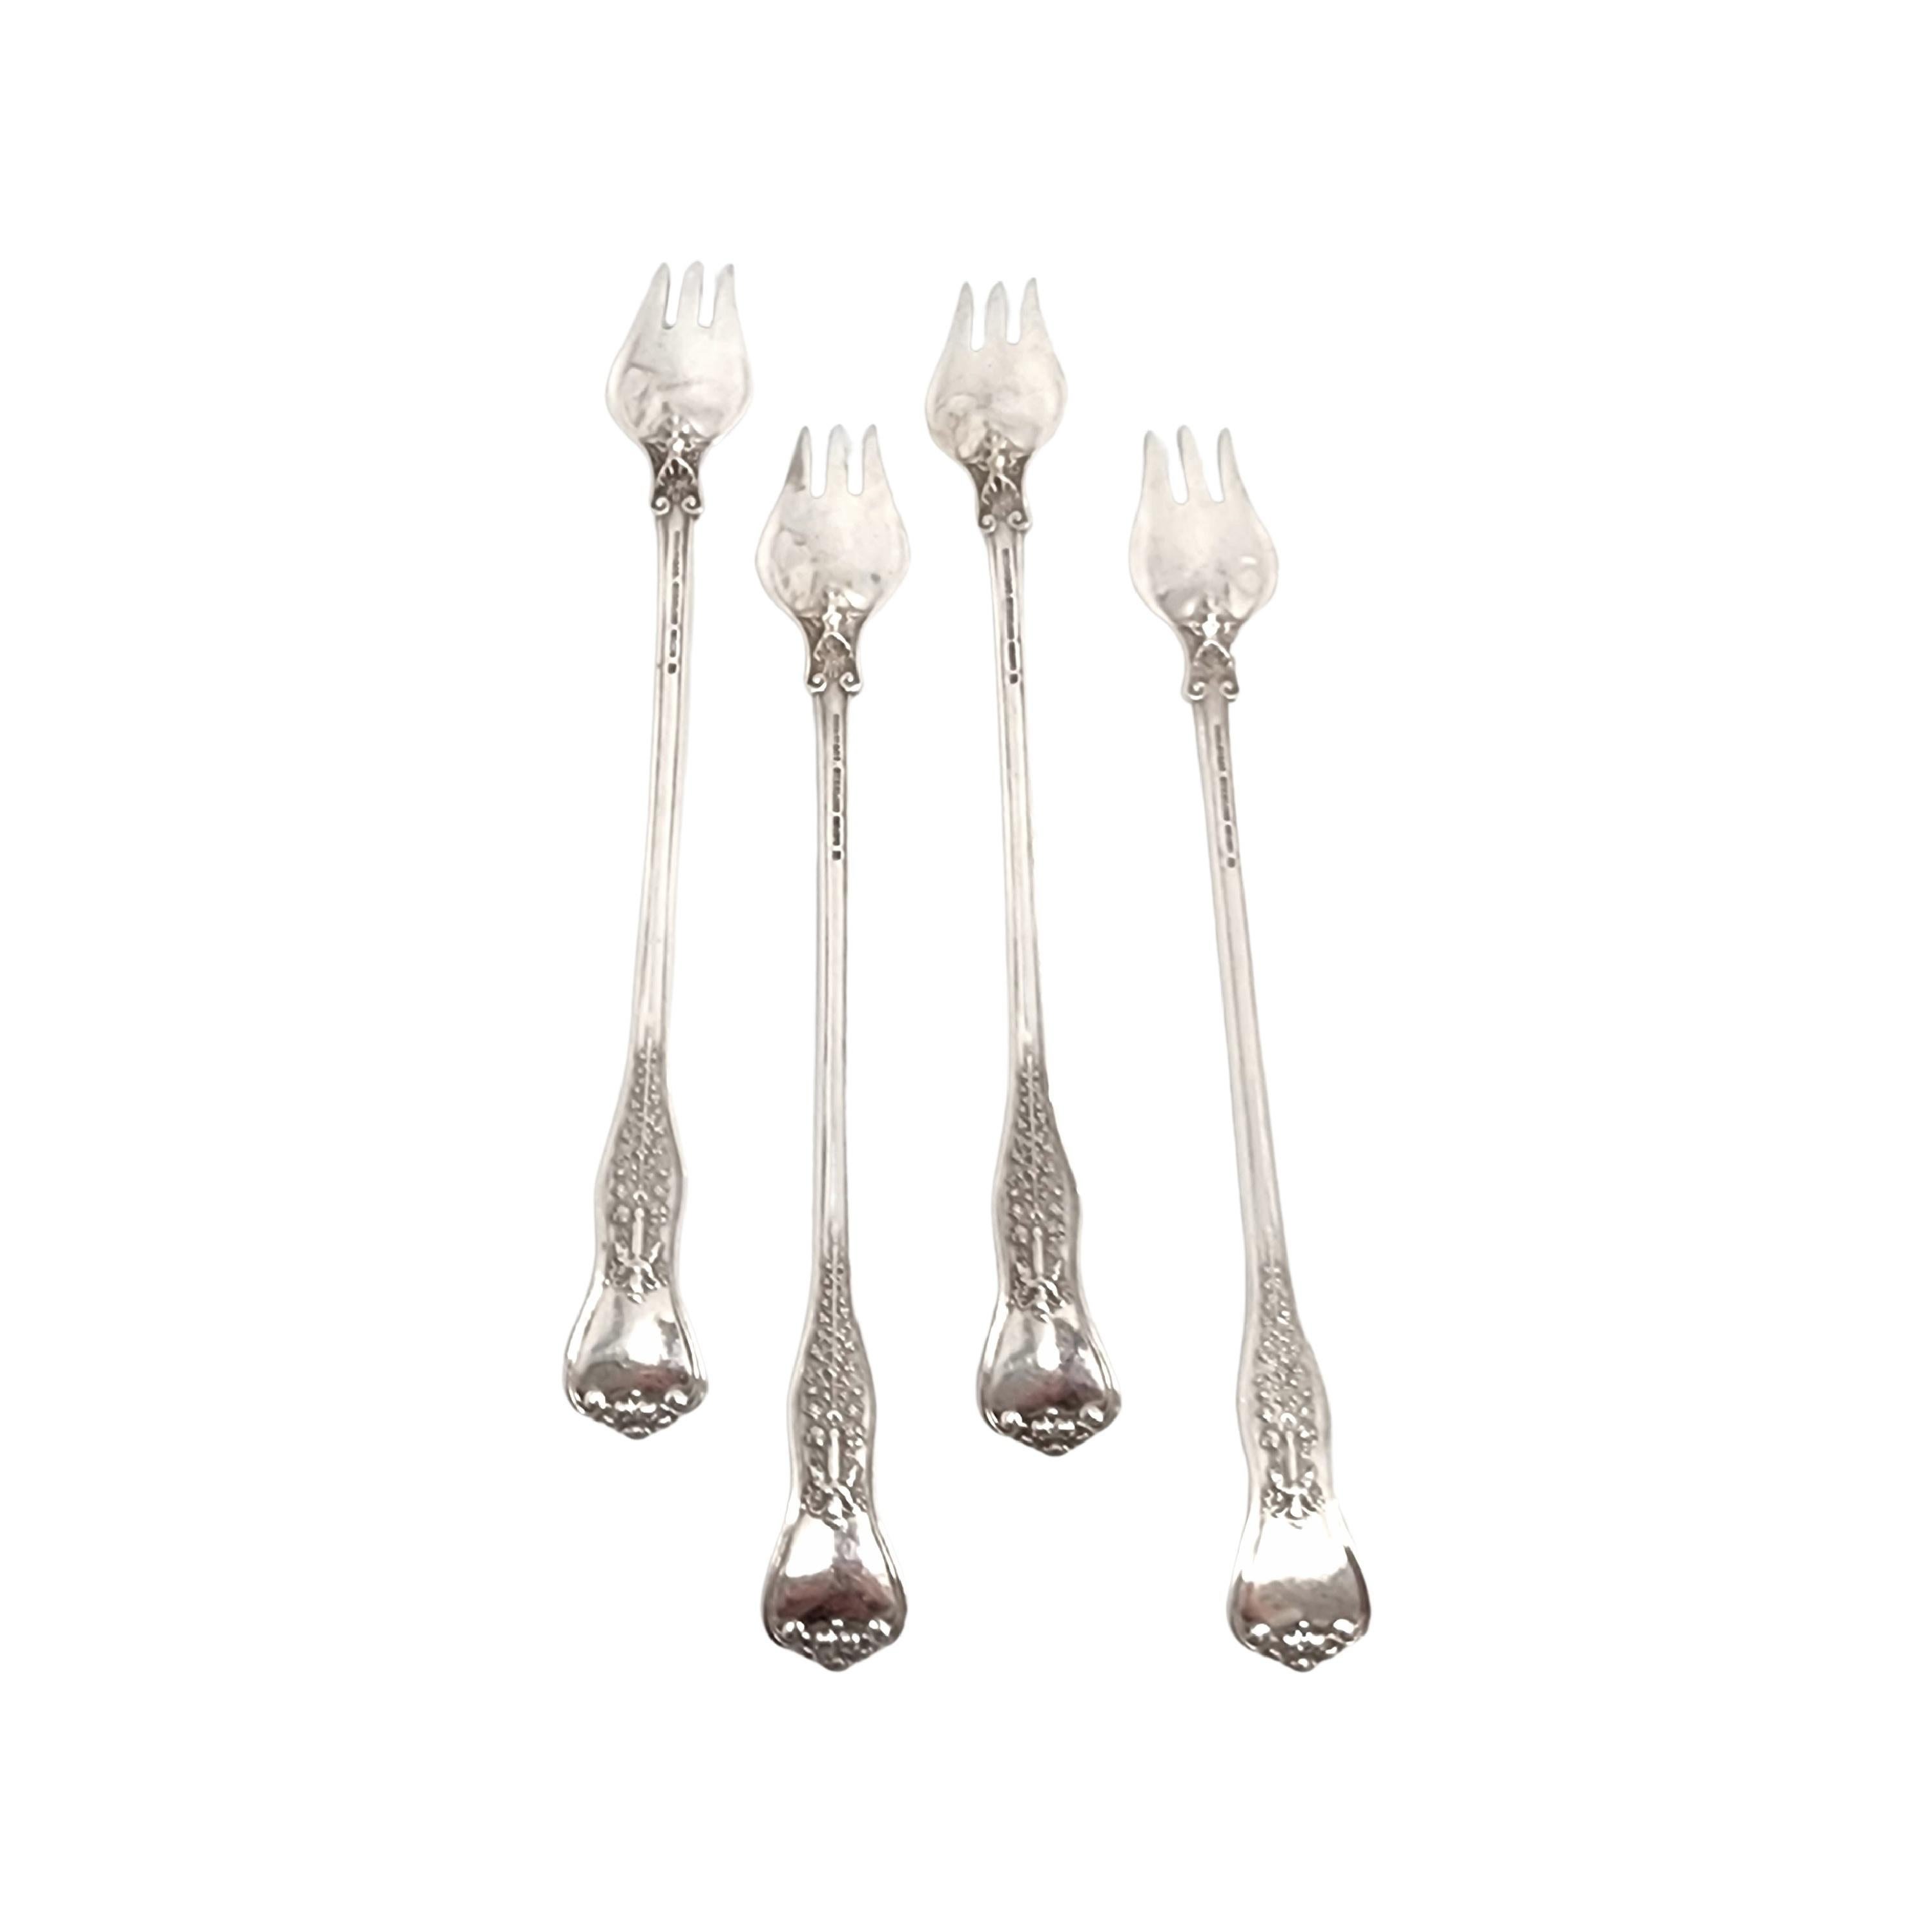 Set of 4 Tiffany & Co Sterling Silver Olympian Cocktail/Oyster Forks 5